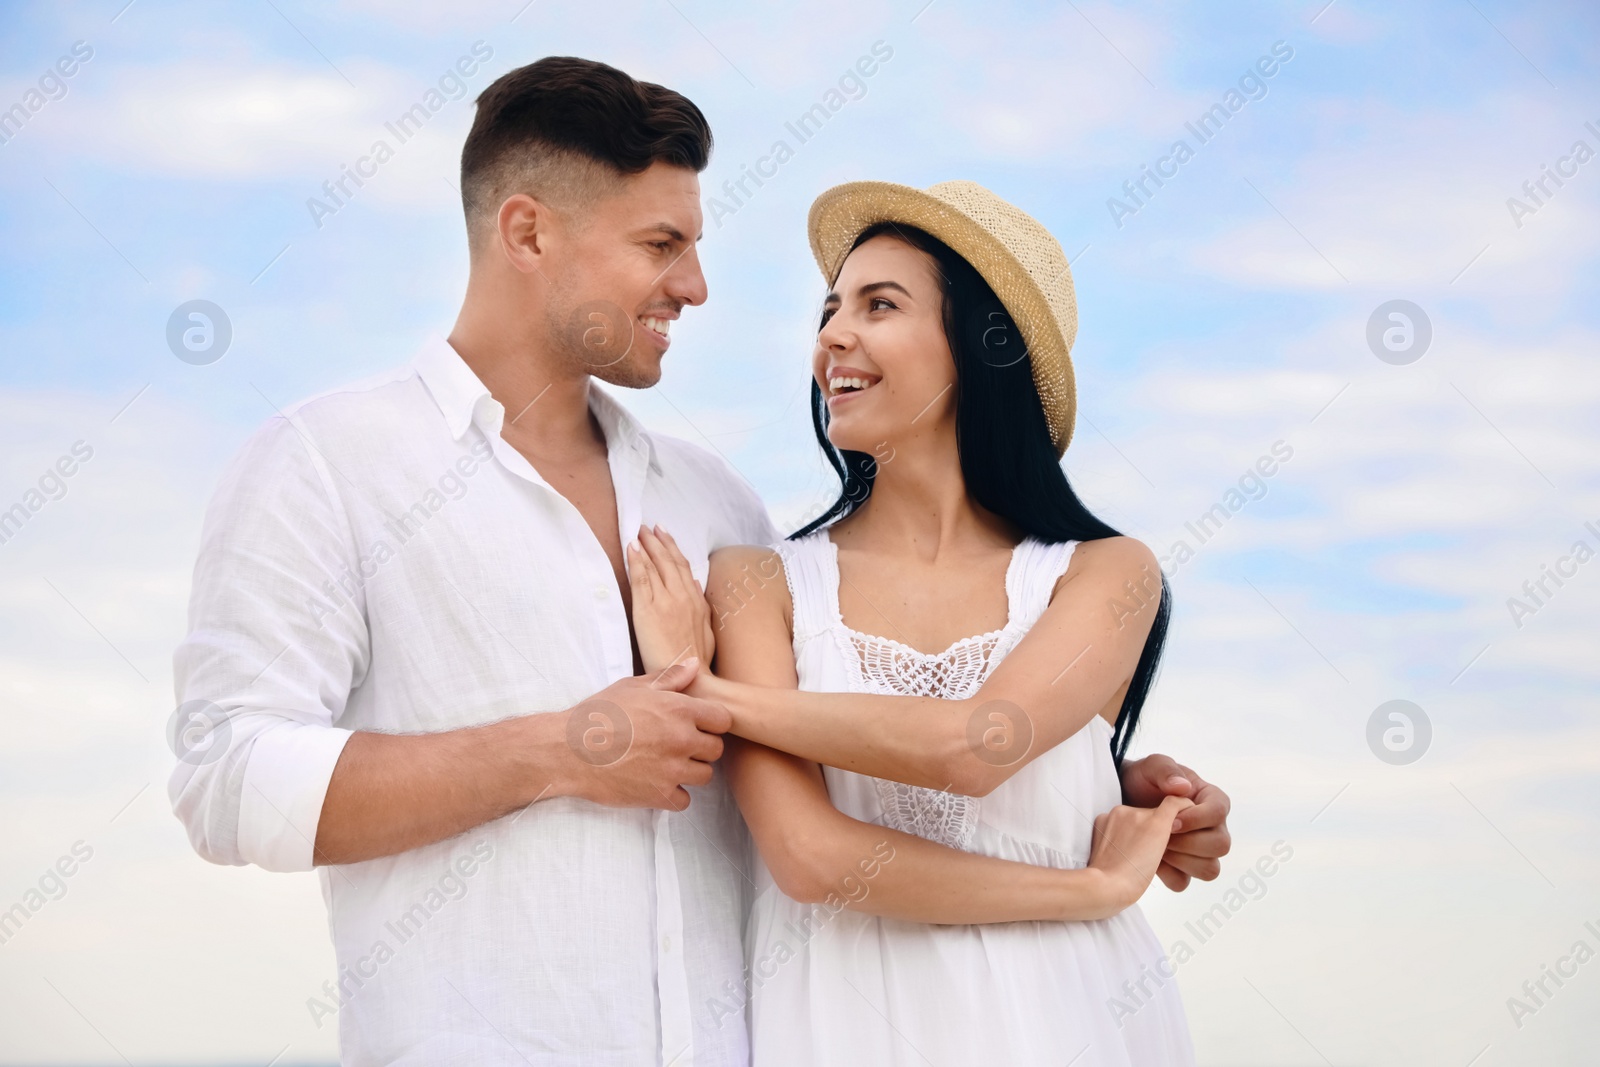 Photo of Happy young couple dancing outdoors in summer